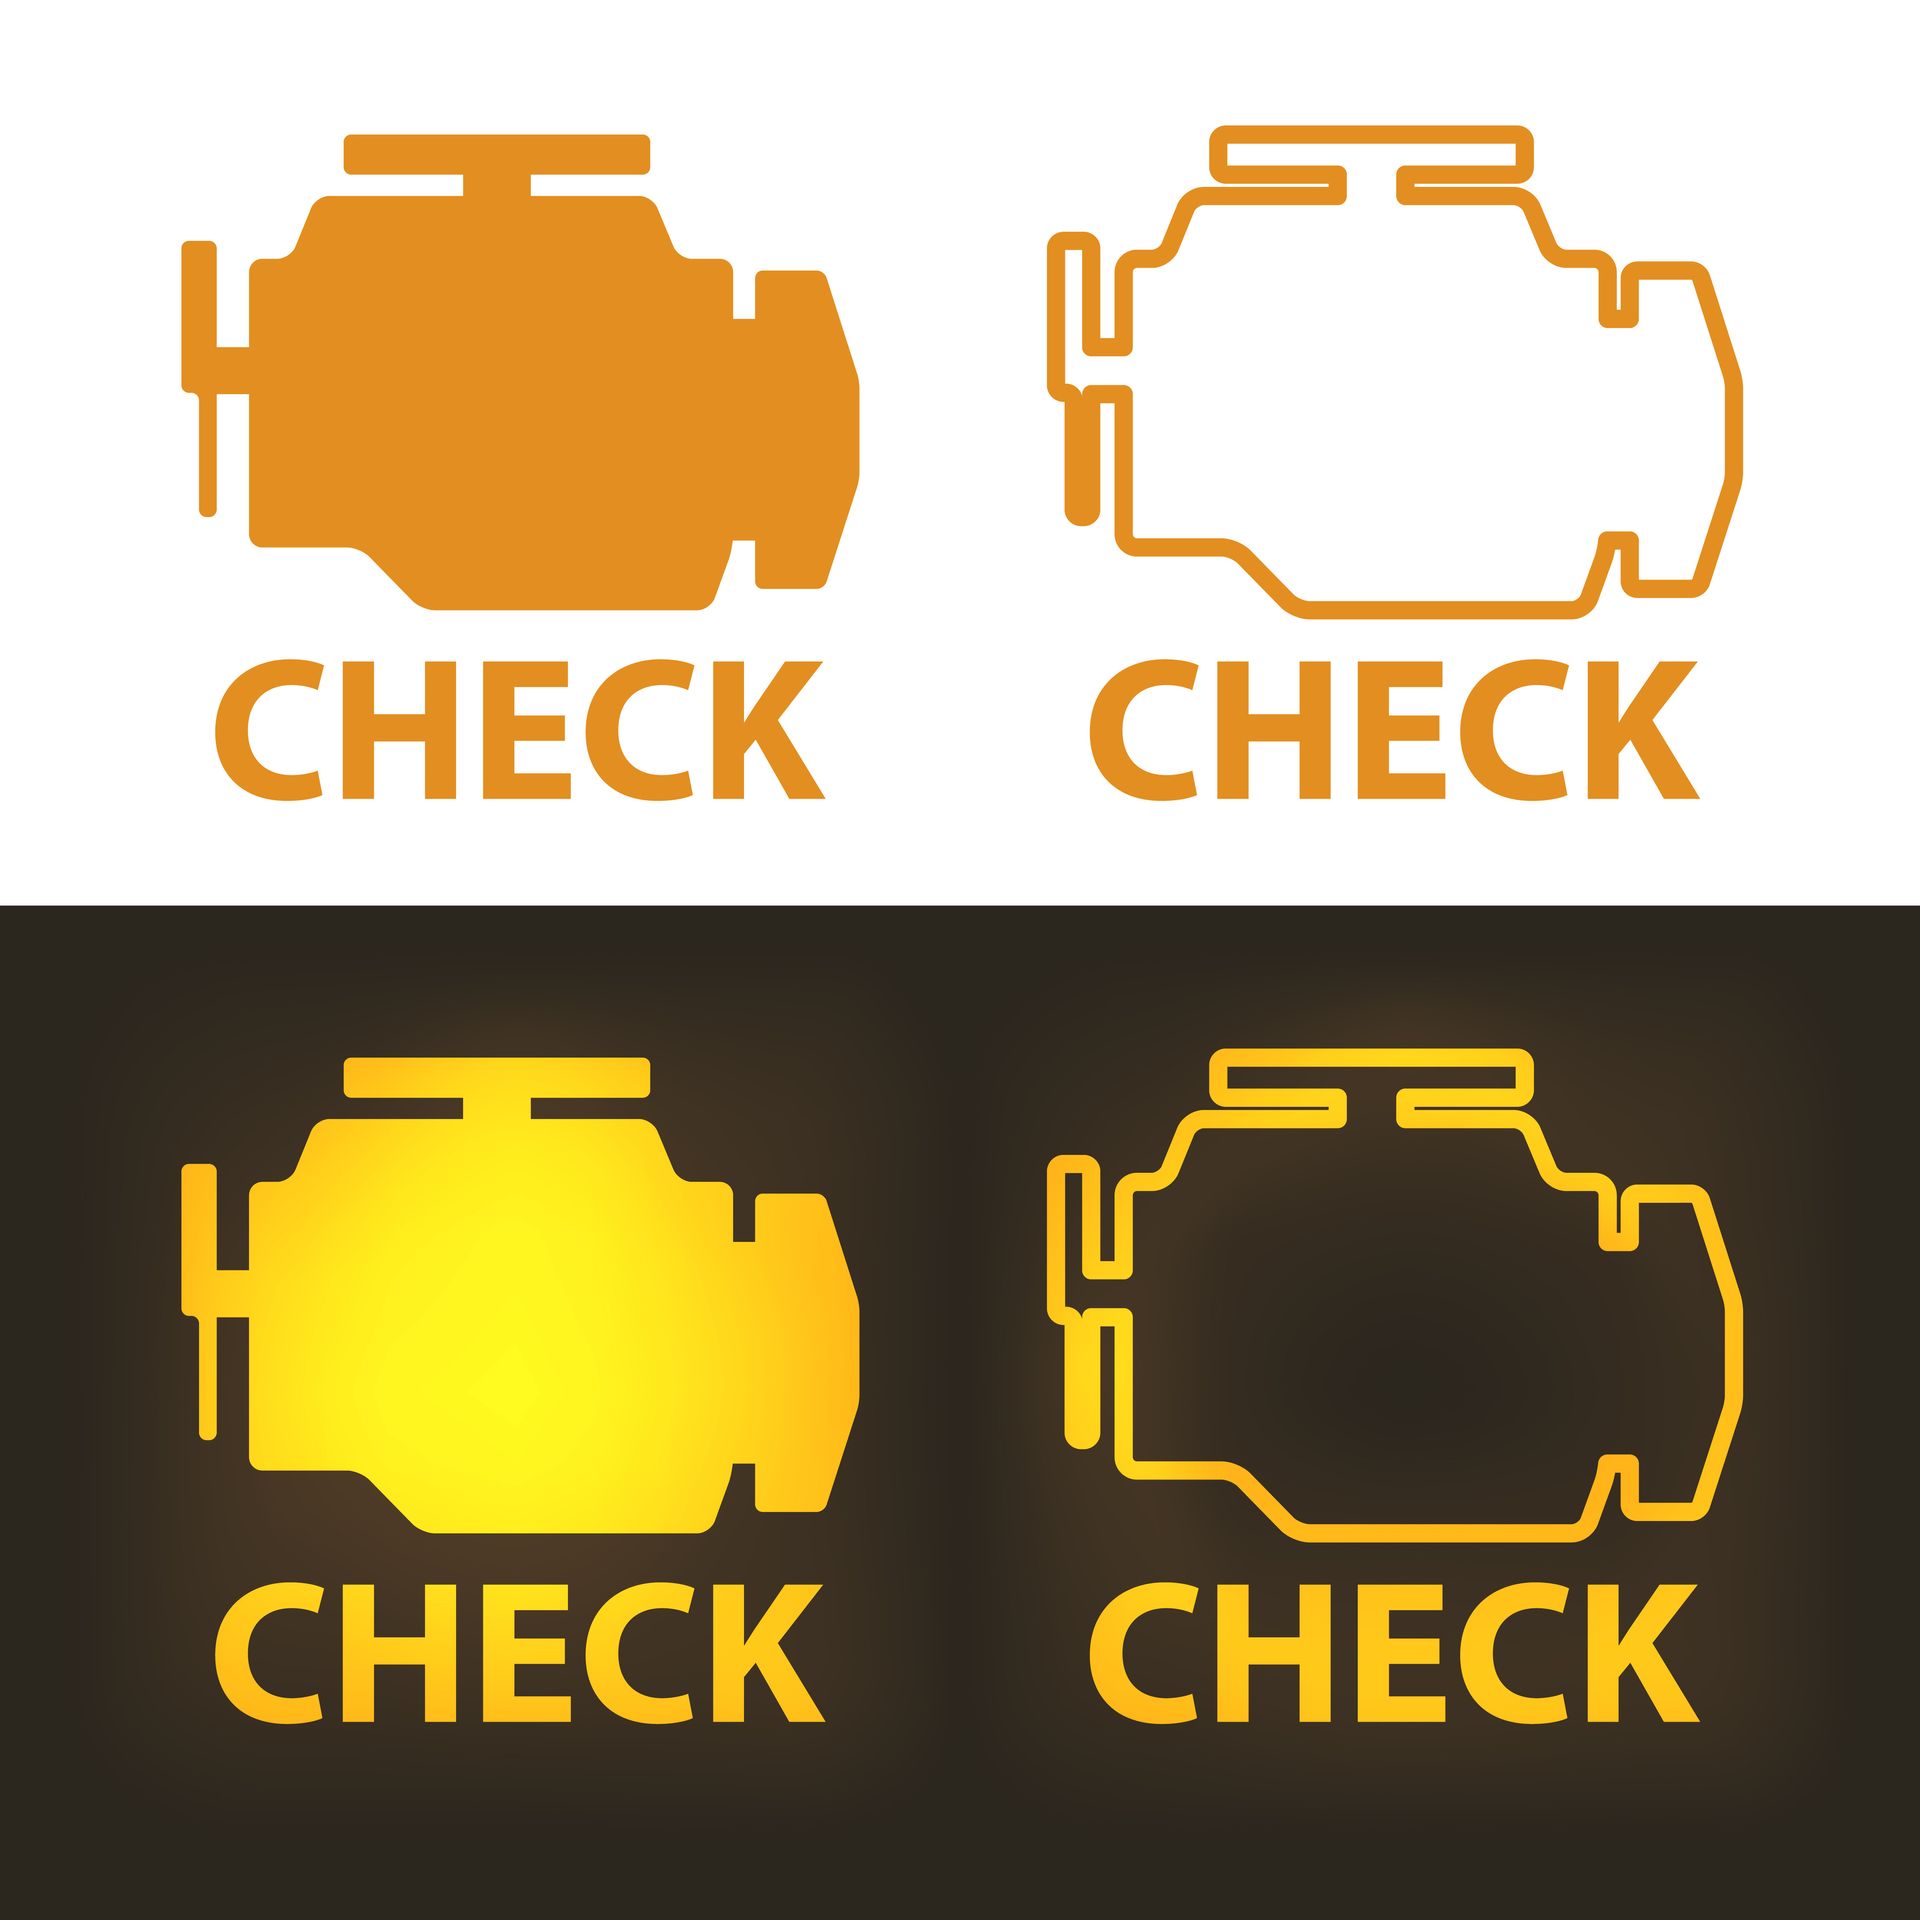 3 of The Oddest Reasons Behind A Check Engine Light | Nationwide Car Care Centers